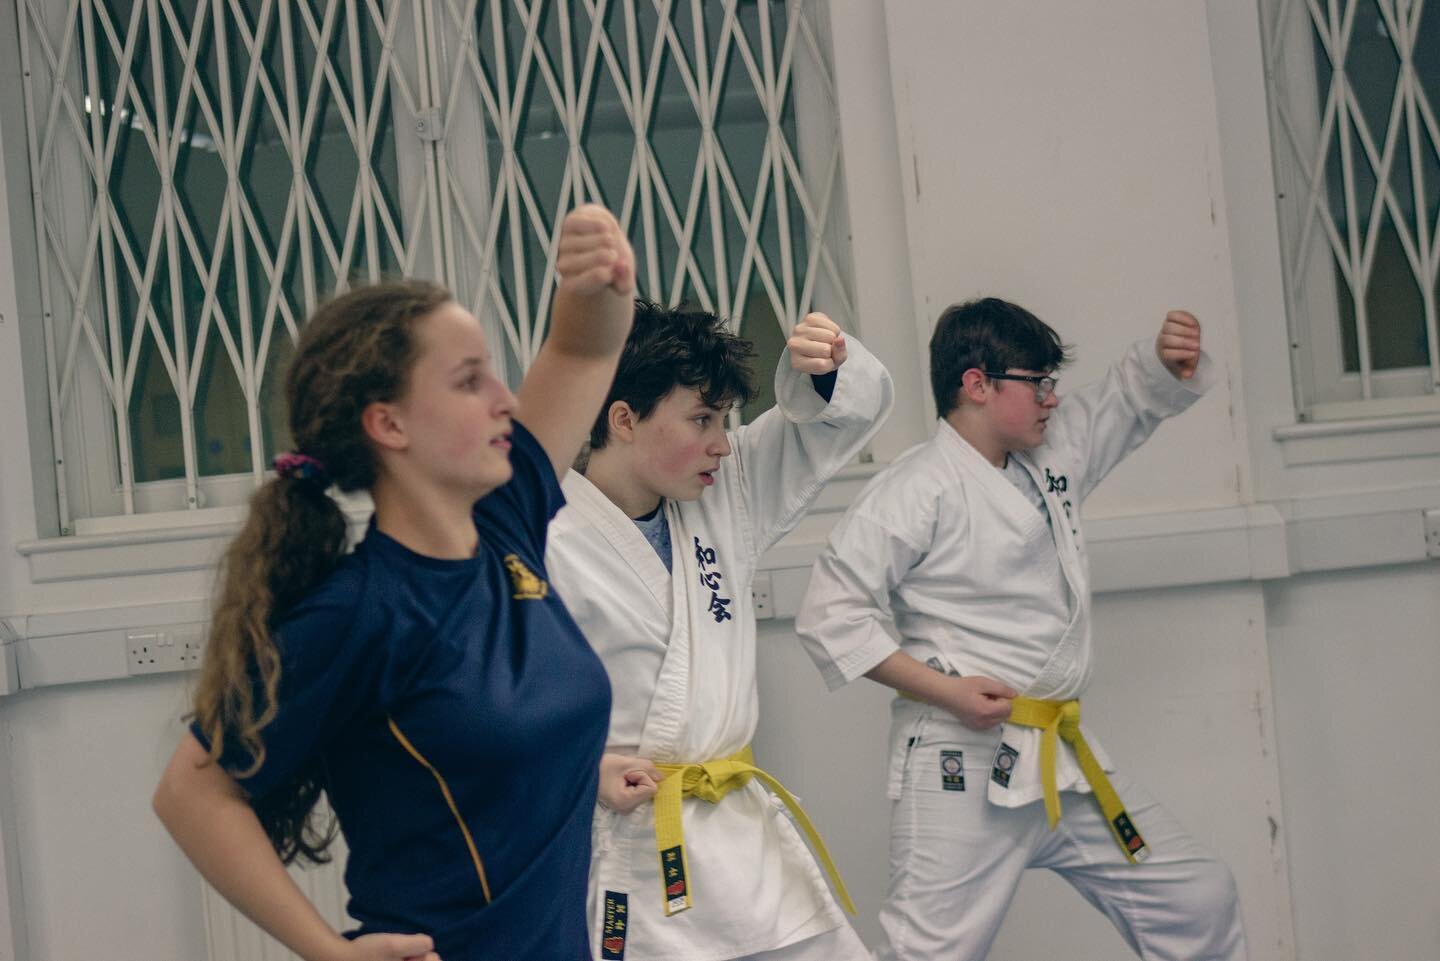 Every Monday 7pm - 8.30pm we hold our Washinkai Karate sessions at the old library. 

The sessions are less by Sensei Sted, and the admission fee is &pound;4. 

Head over to the &lsquo;How we help - Fitness&rsquo; section of our website to learn more